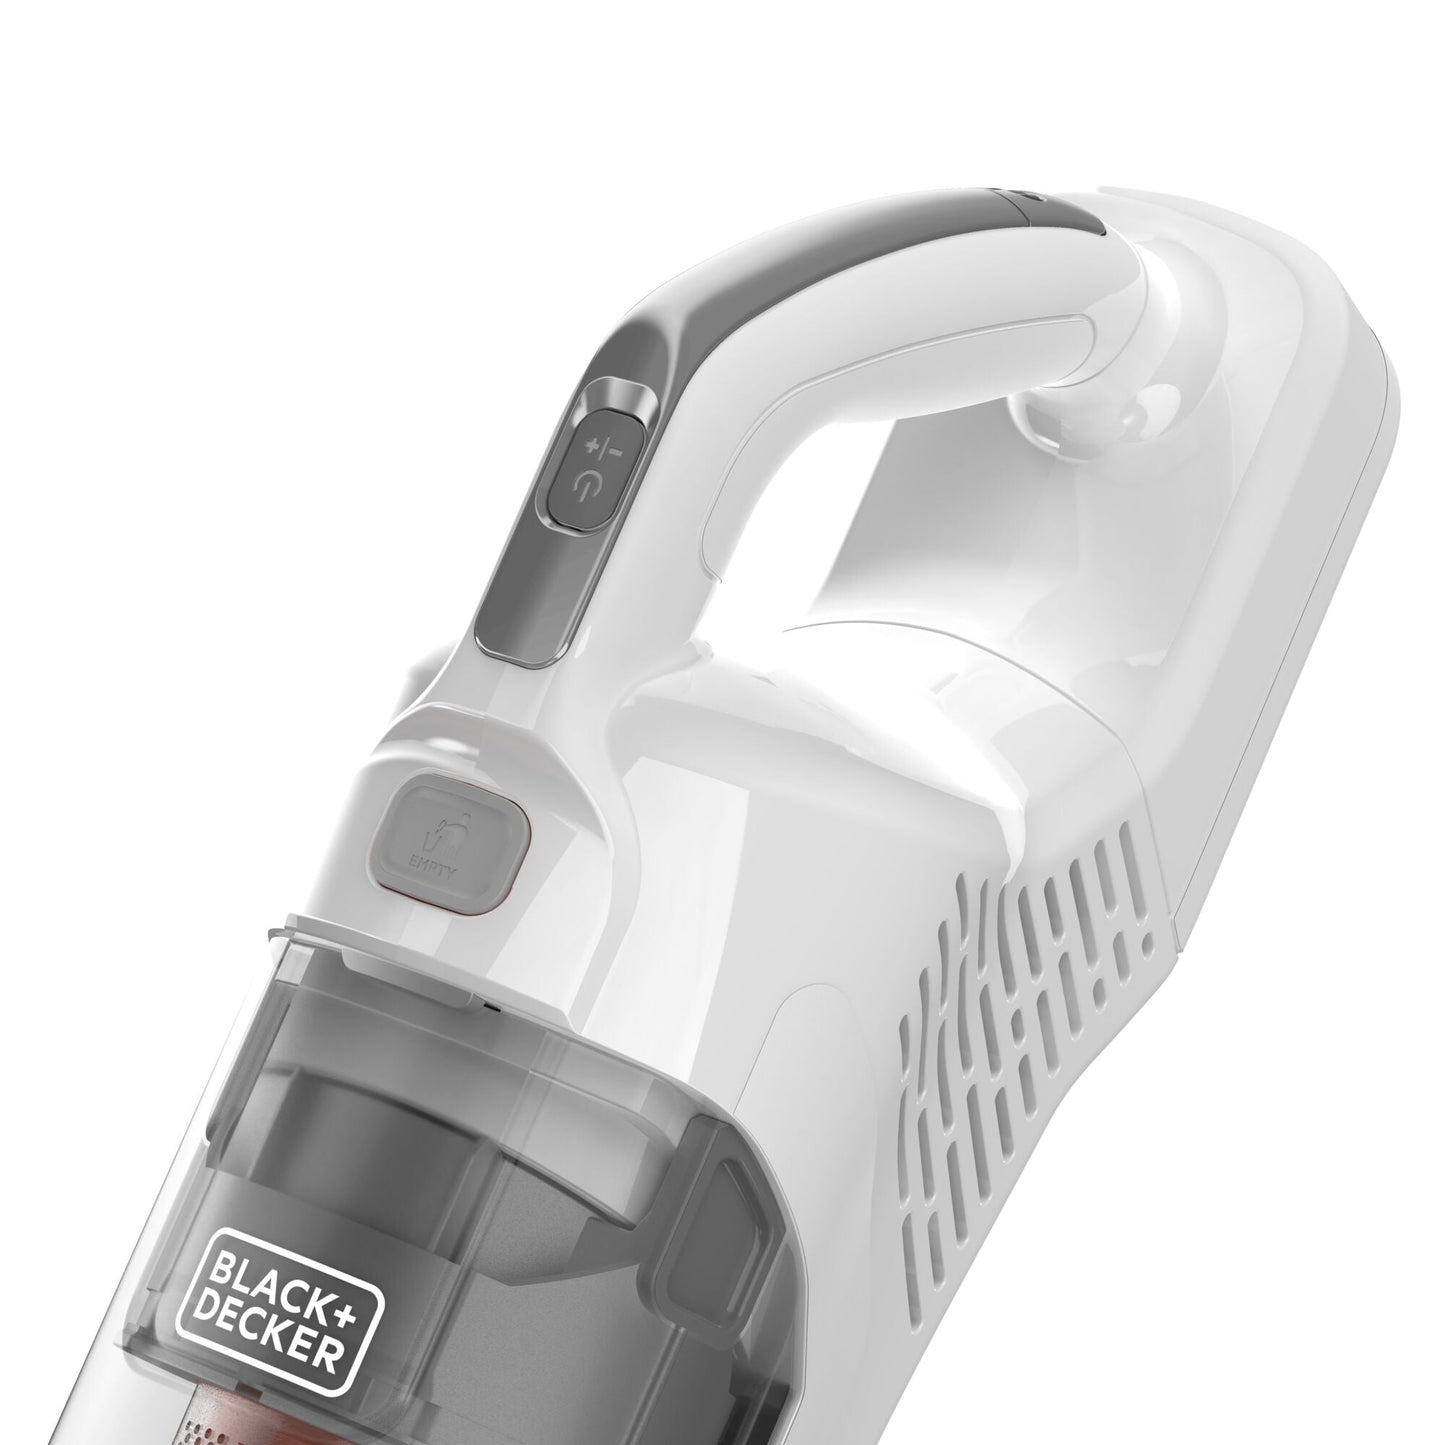 18V 2-IN-1 STICK VACUUM WITH INTEGRAL 1.5AH BATTERY